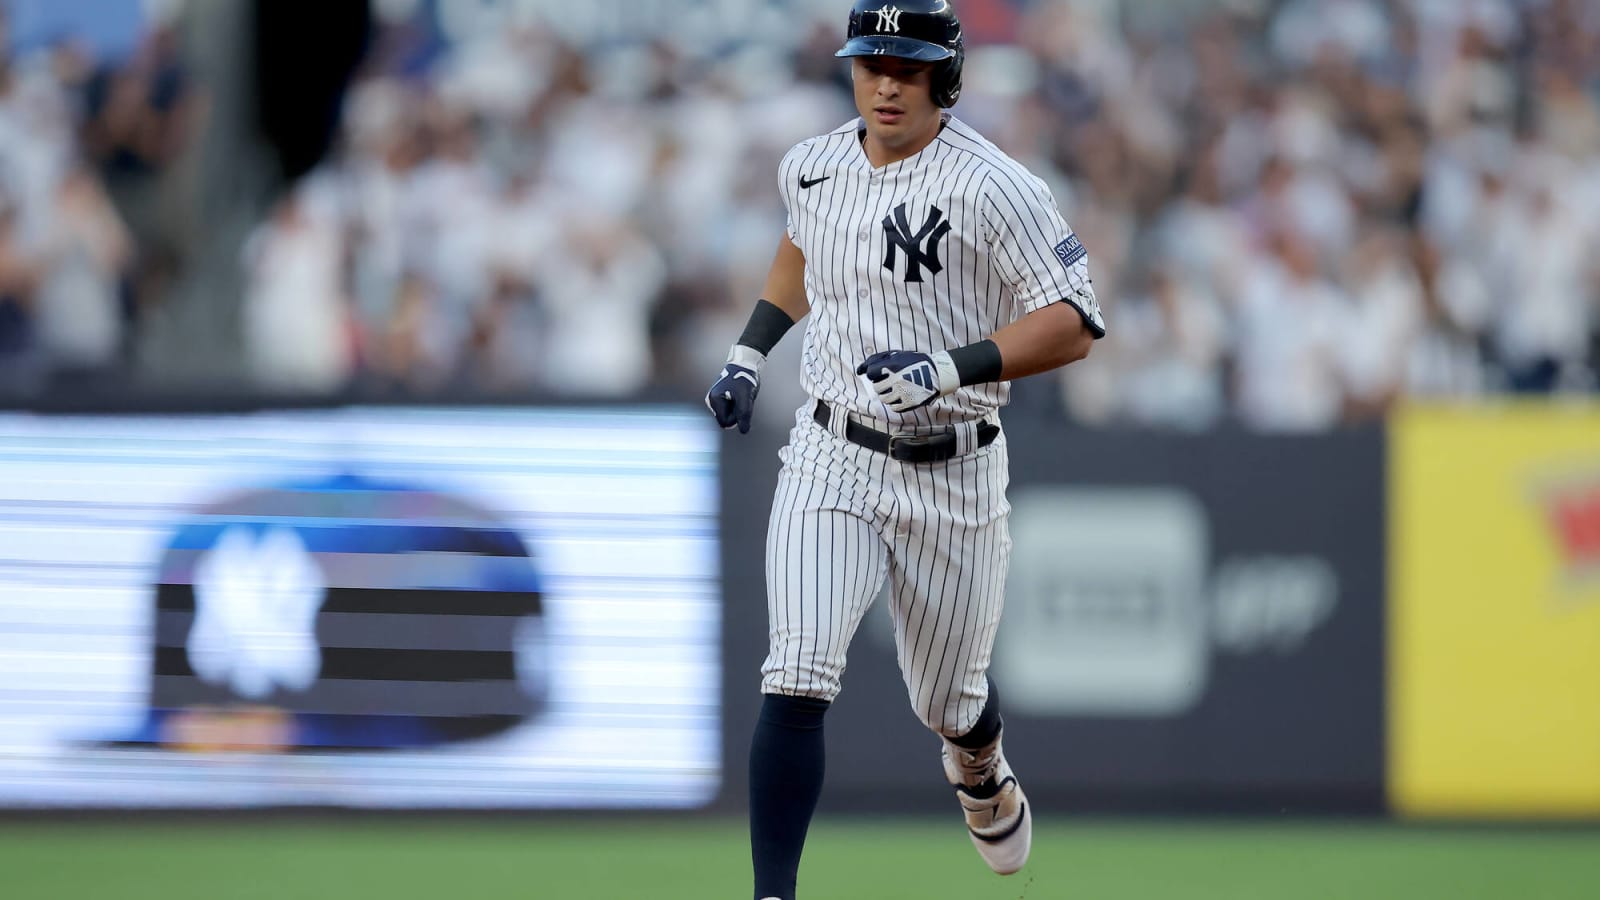 Yankees’ rookie shortstop is making a strong case for the future